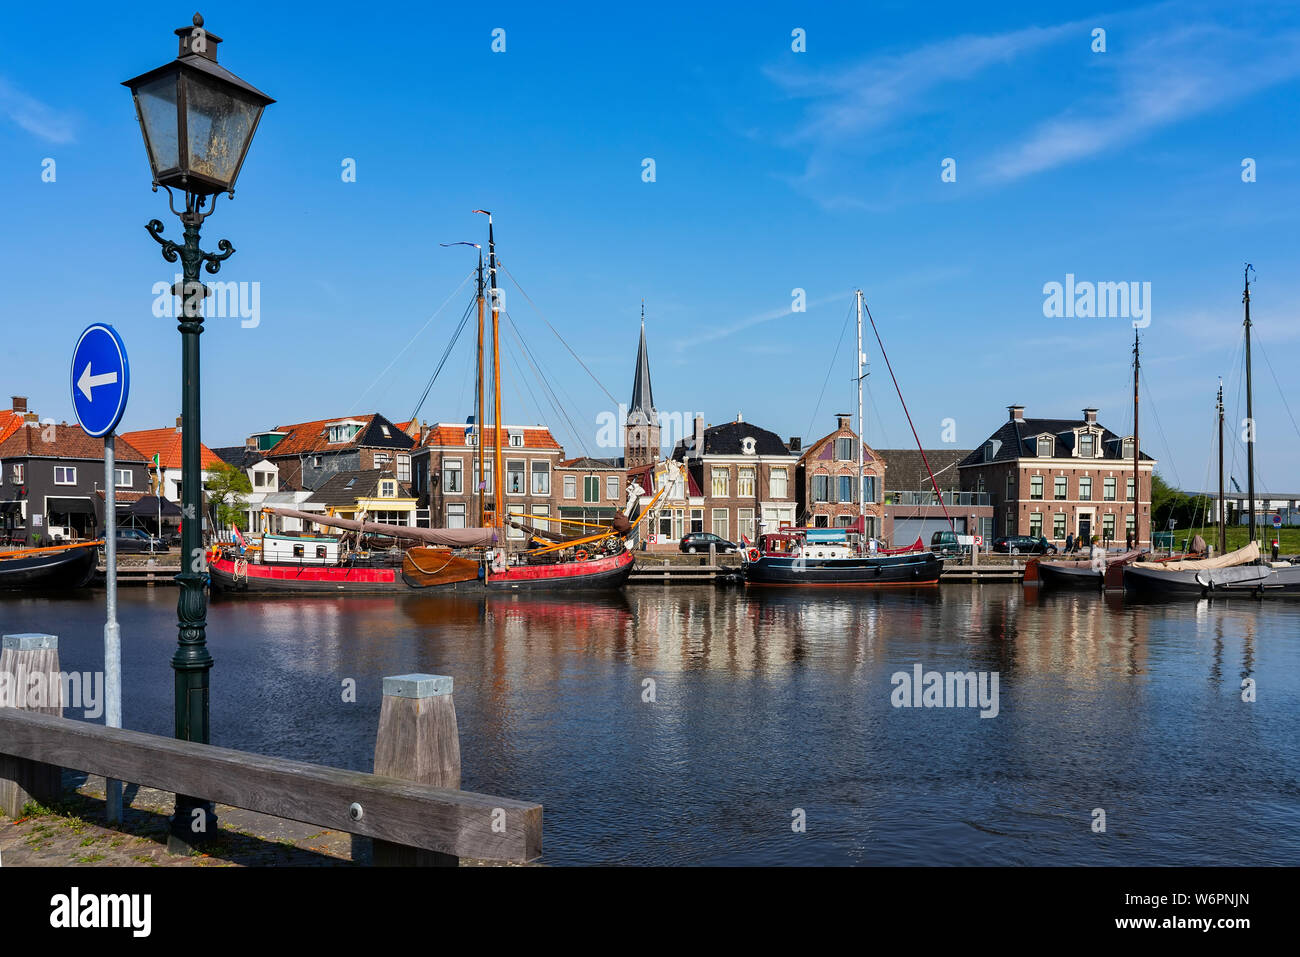 Lemmer is a town in the municipality of De Fryske Marren (province of Friesland), in the Netherlands and is one of Friesland's most important water sp Stock Photo